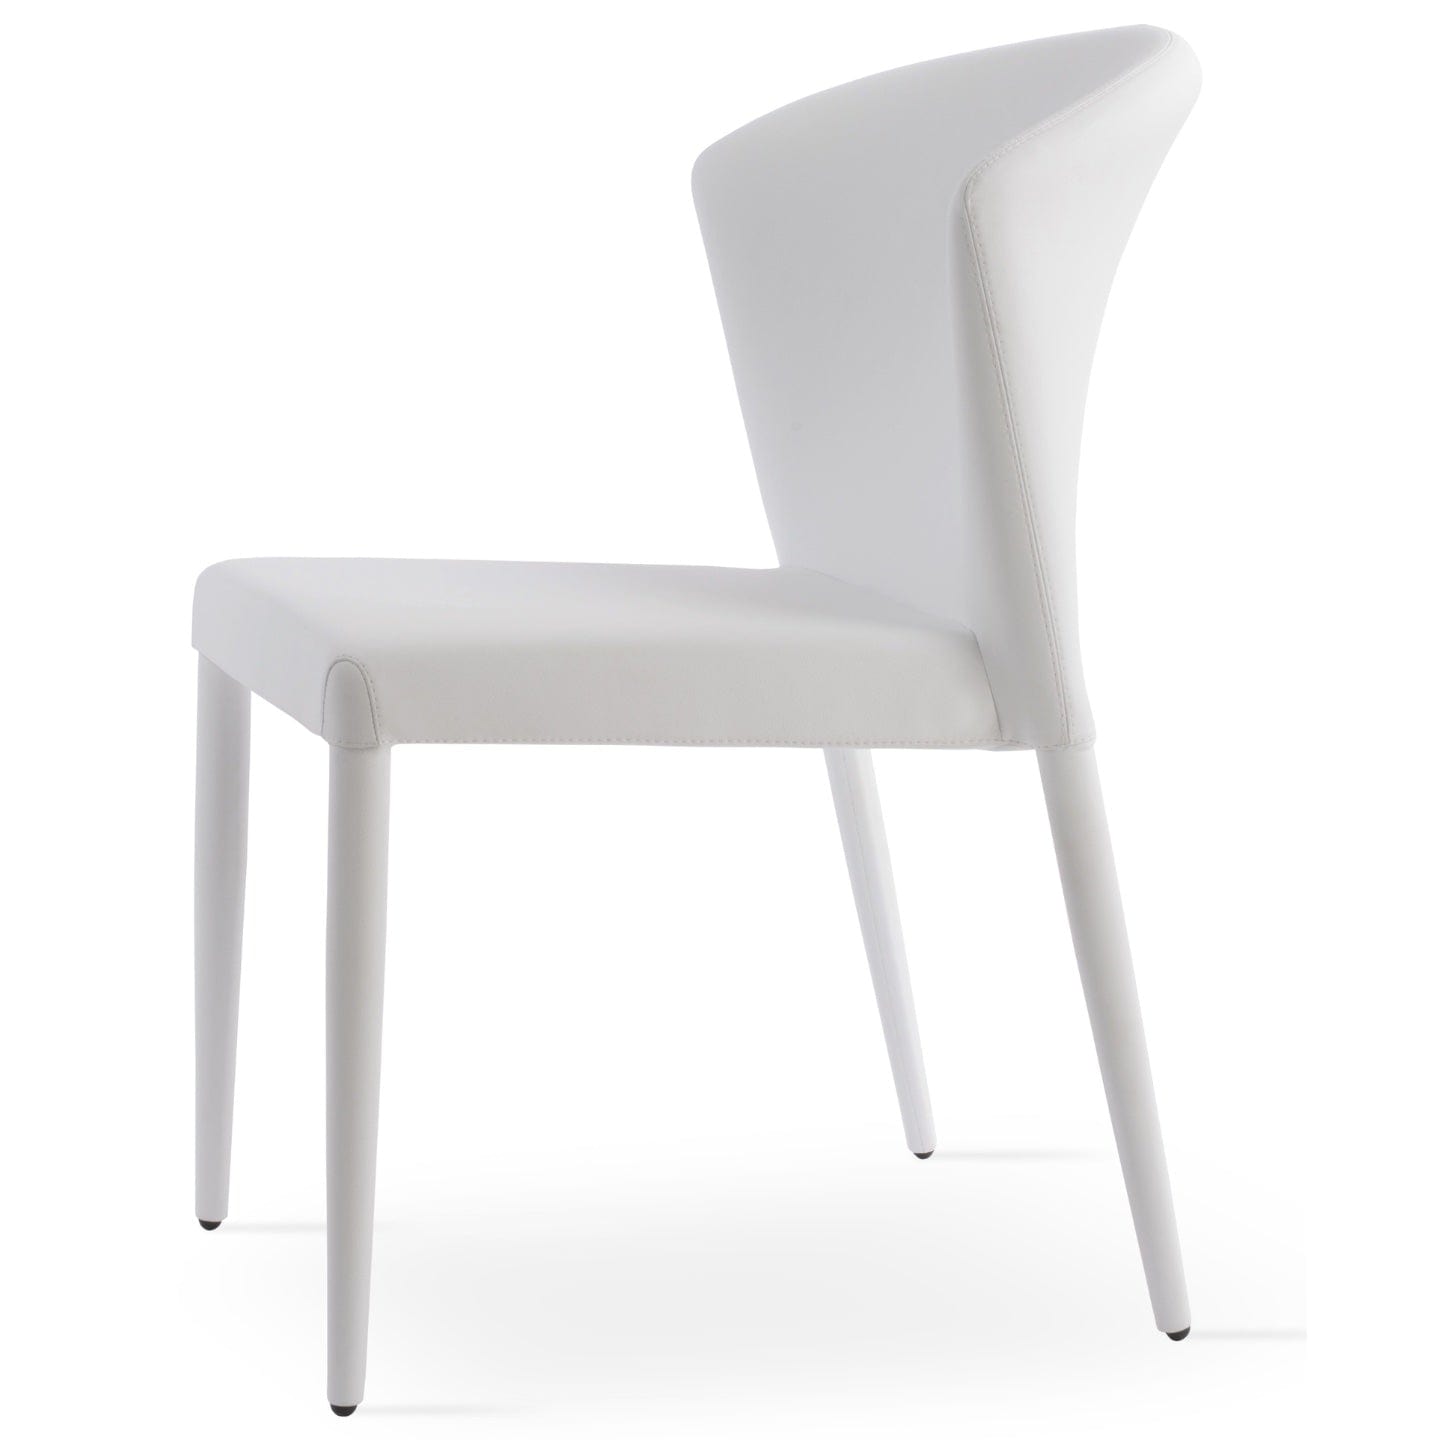 sohoConcept Kitchen & Dining Room Chairs Capri Stackable Restaurant Chairs | Cream Leather Metal Dining Chairs